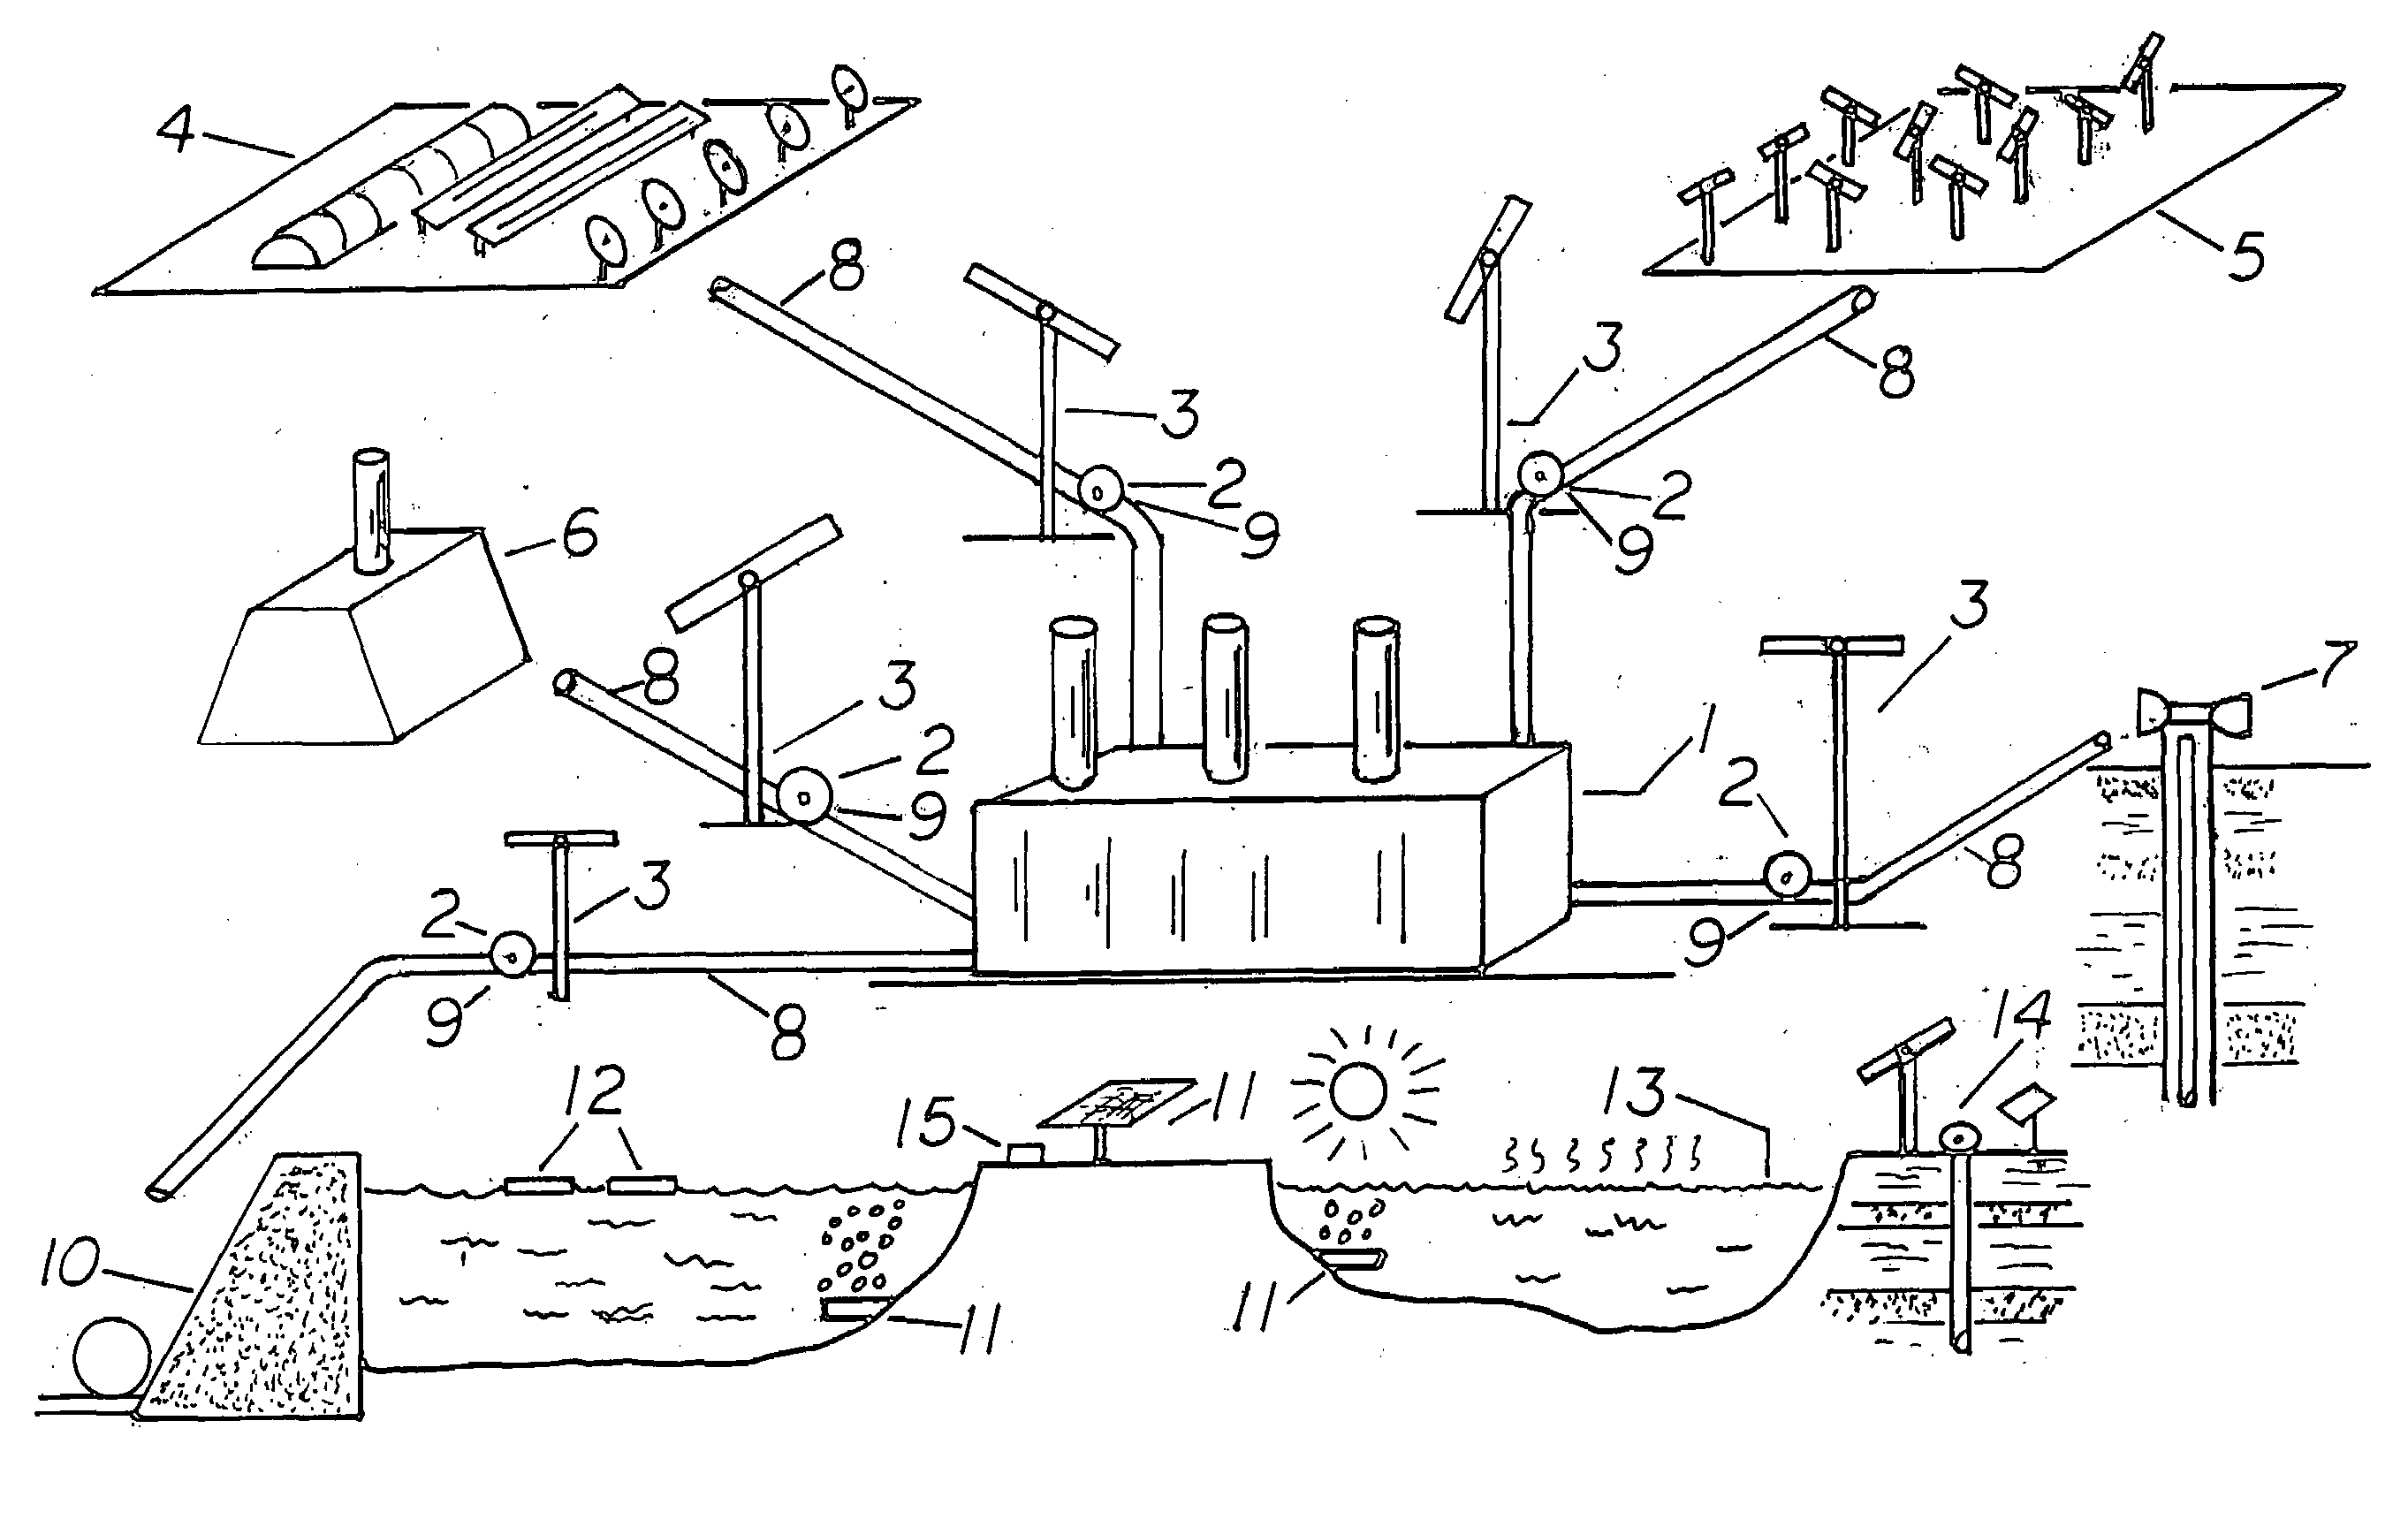 Use of renewable energy like solar, wind, geothermal, biomass, and hydropower for manufacturing combustion air for a fossil fuel burner and firebox